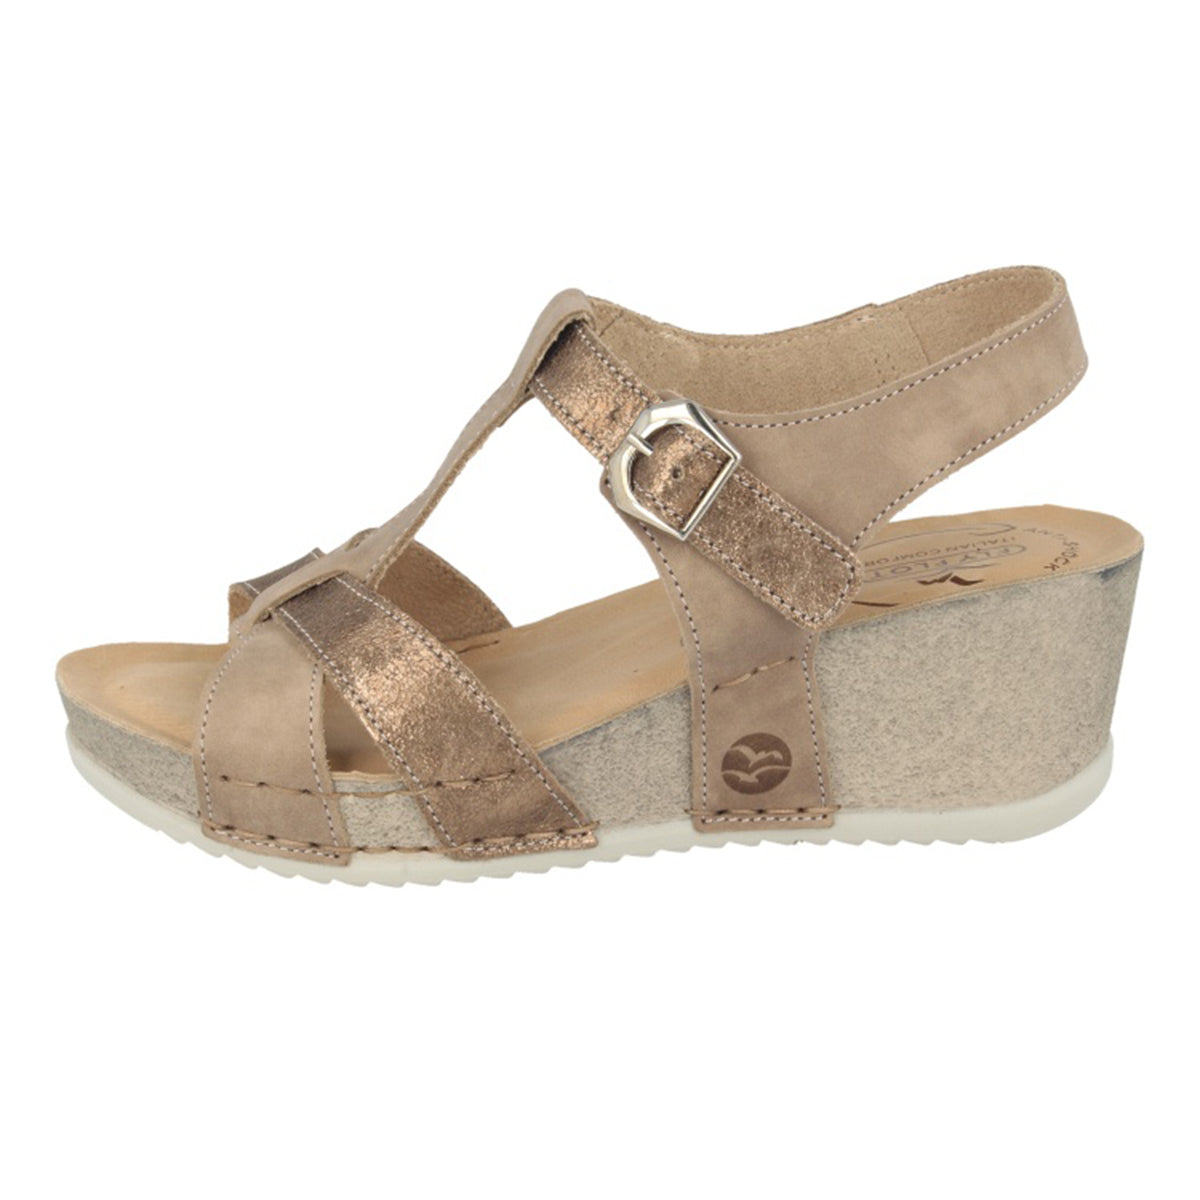 See the Leather Strappy Wedge Back Strap Women Sandals With Anti-Shock Cushioned Leather Insole in the colour TAUPE, available in various sizes